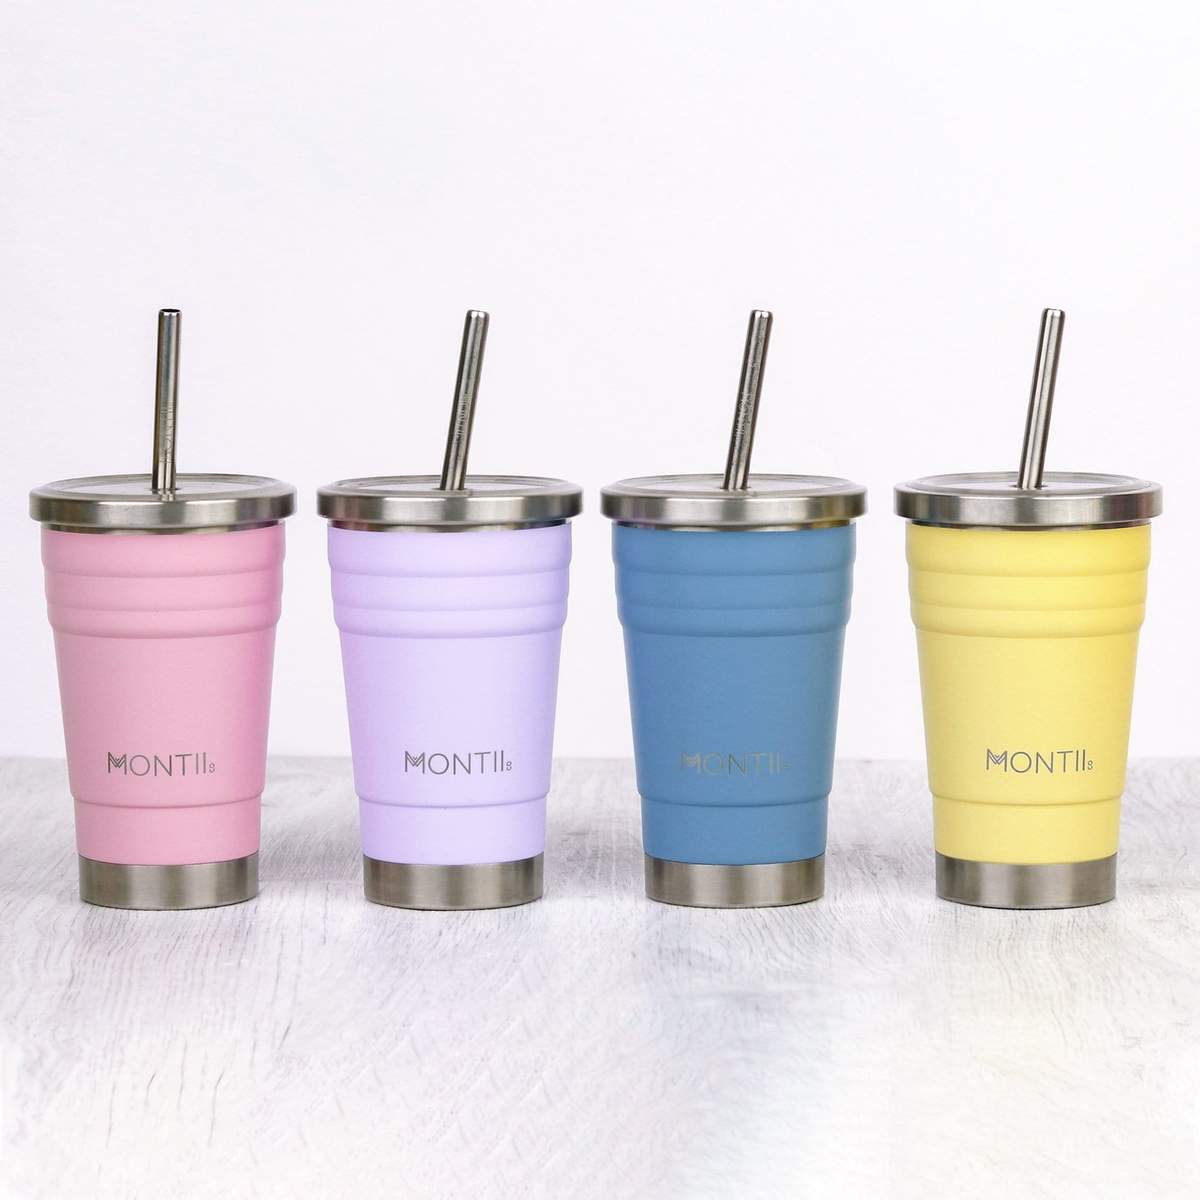 http://astandco.com/cdn/shop/collections/Montii_smoothie_resuable_stainless_steel_kids_toddler_smoothie_cup_best_melbourne_australia_eco_friendly_blue_boys_girls_ast_and_co_pink_yellow_purple_edd52337-fc47-4f92-9dde-78caa8bbe67e_1200x1200.jpg?v=1604838778